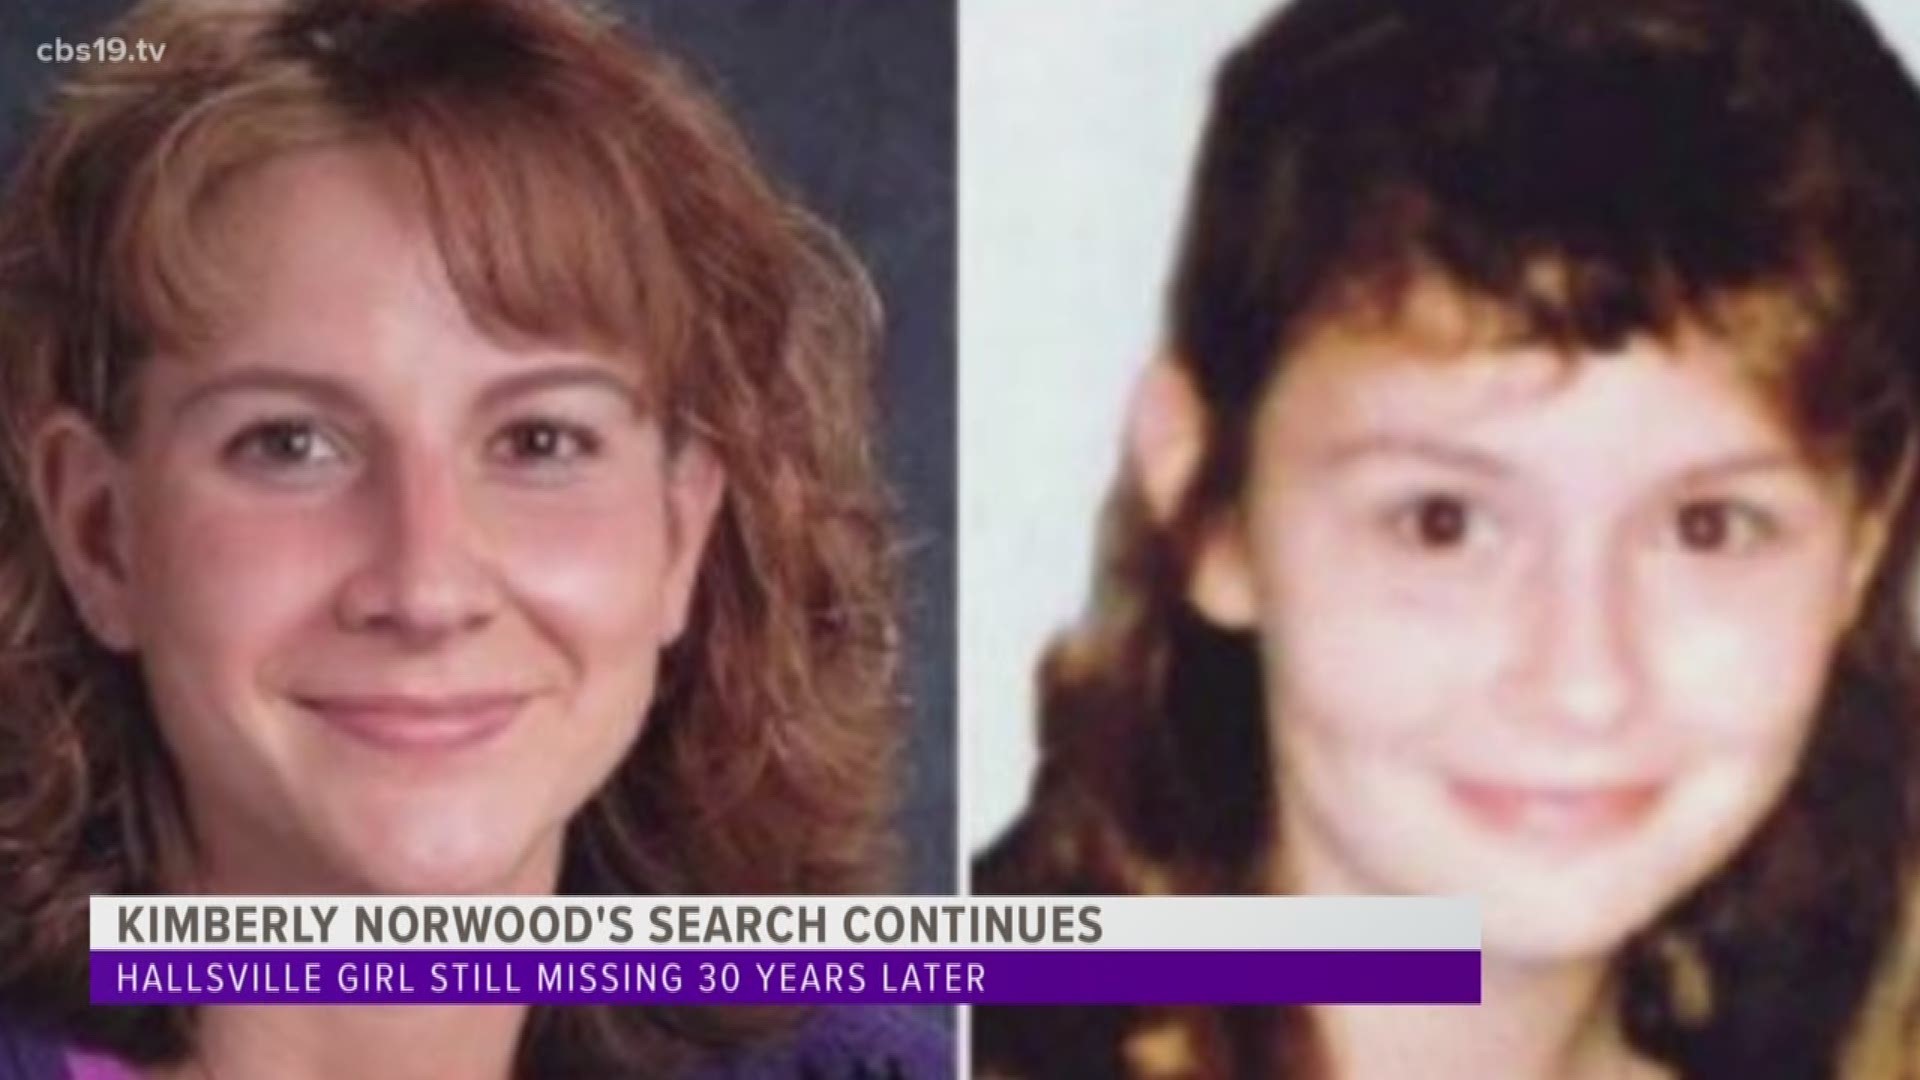 It's been three decades since then-12-year-old Kimberly Norwood disappeared near her home in Hallsville. Thirty years later, her family is still seeking answers. CBS19 takes a closer look at the case that remains unsolved.